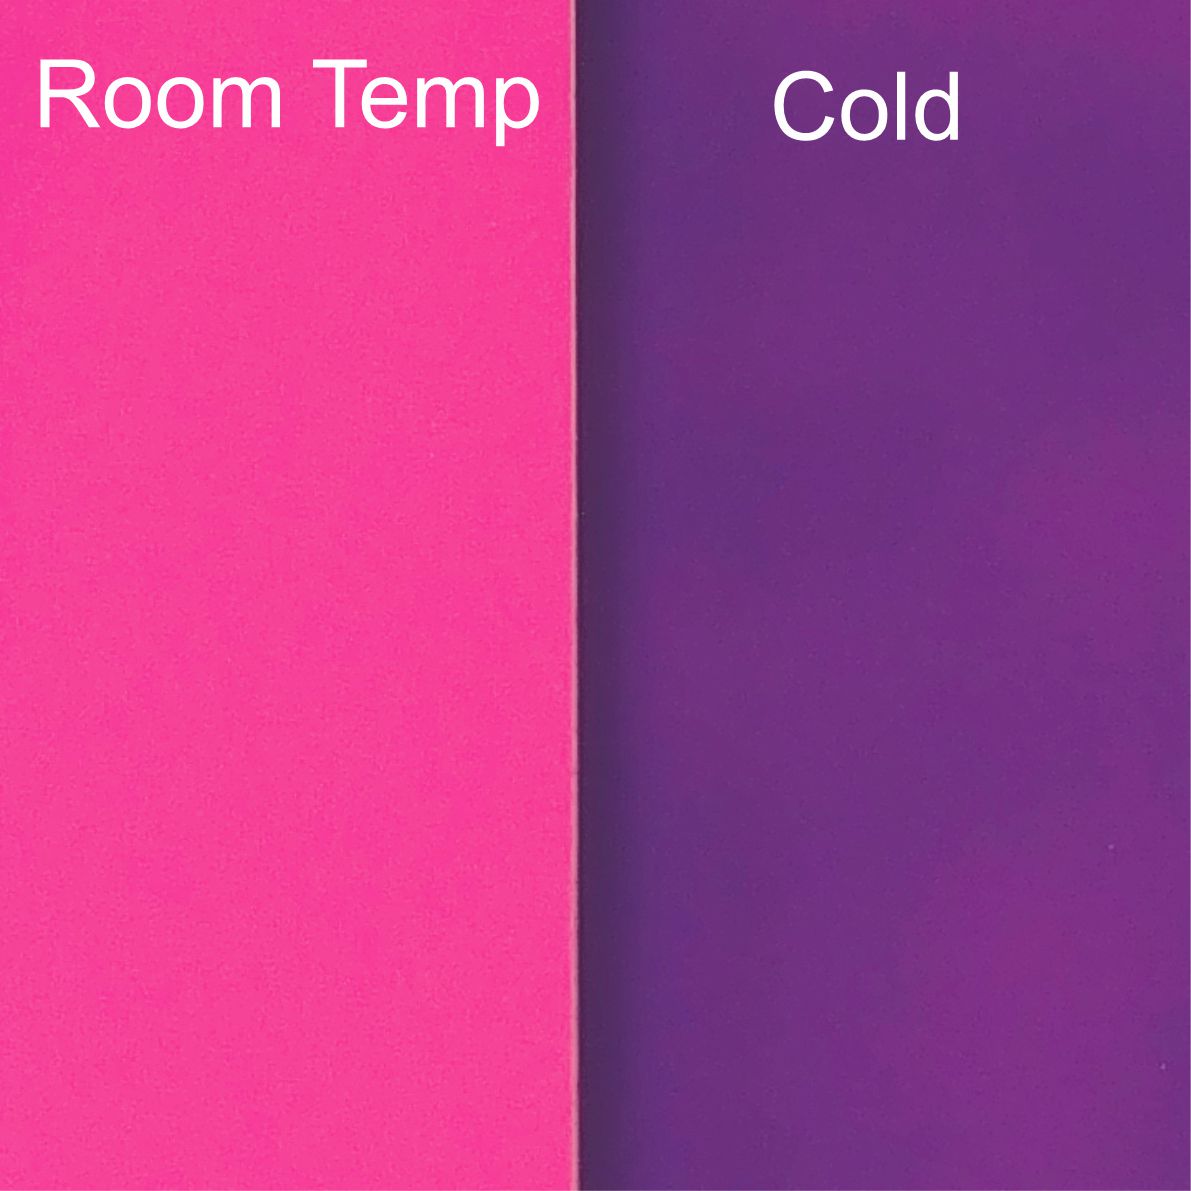 Color Changing Vinyl - Cold Pink/Purple - 12x12 Sheet